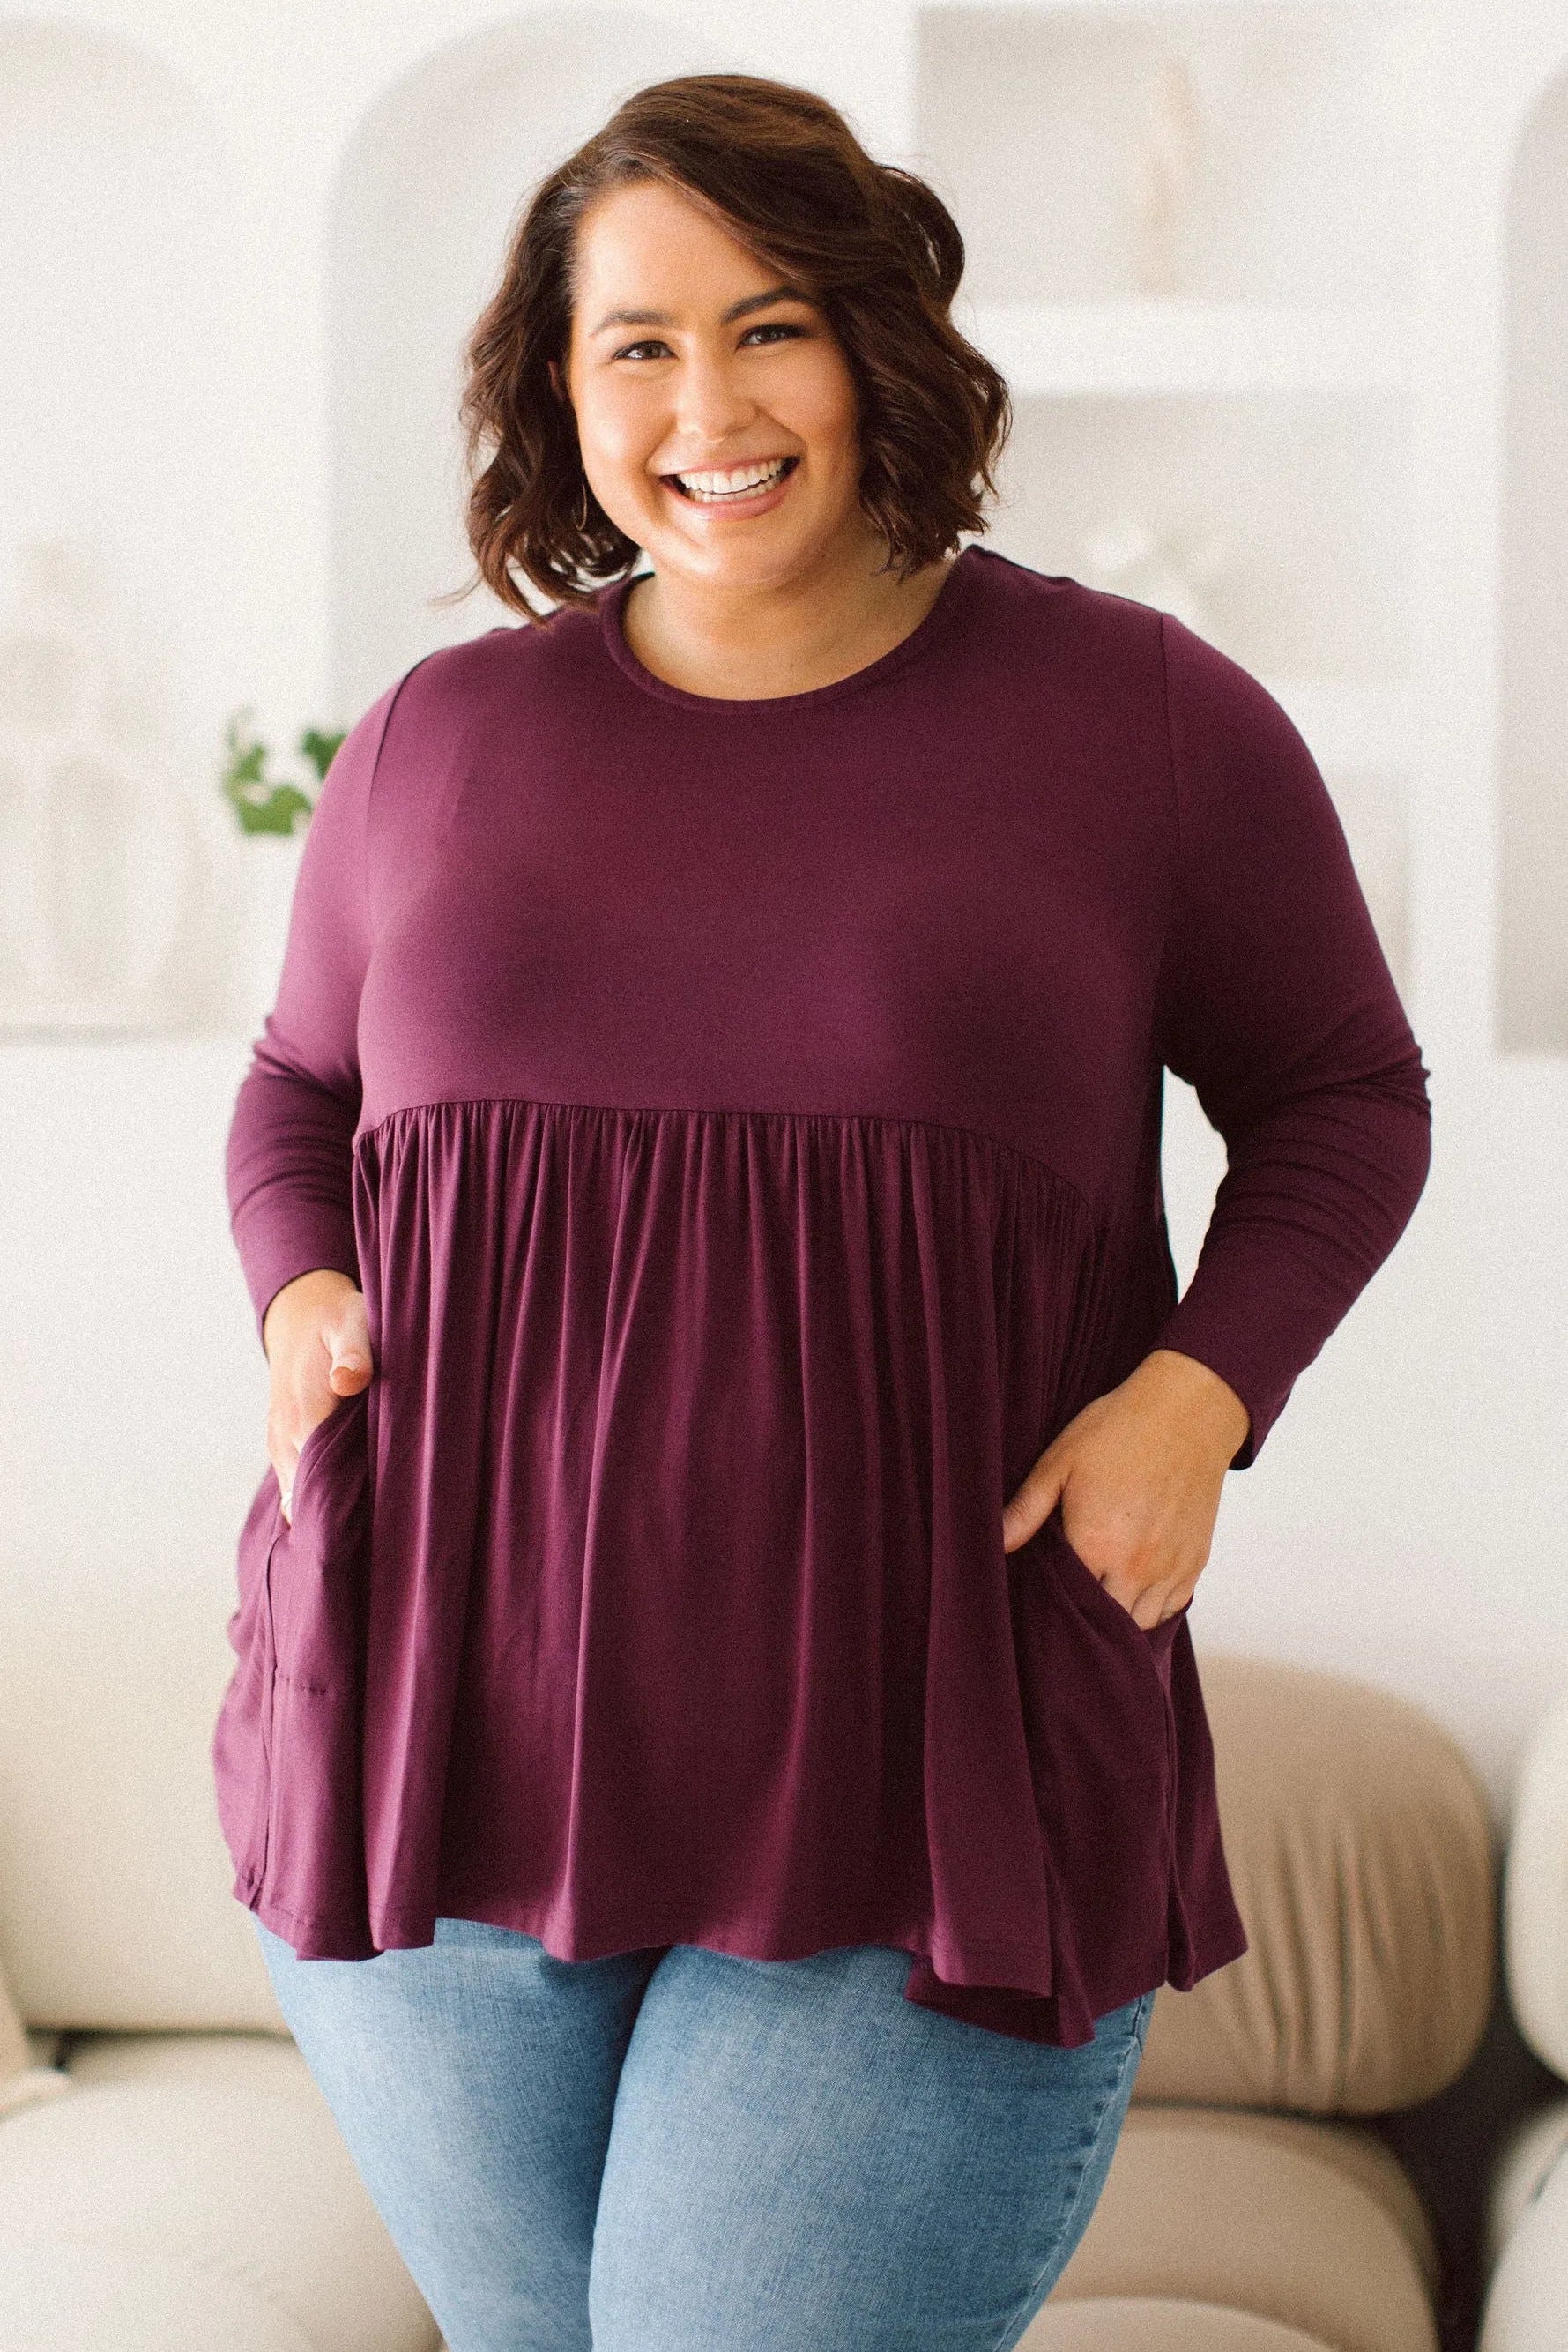 Plus Size clothing,  women modeling a Plus Size Long Sleeve Top - Embrace Berry Elegance with Lucy Long Sleeve Top